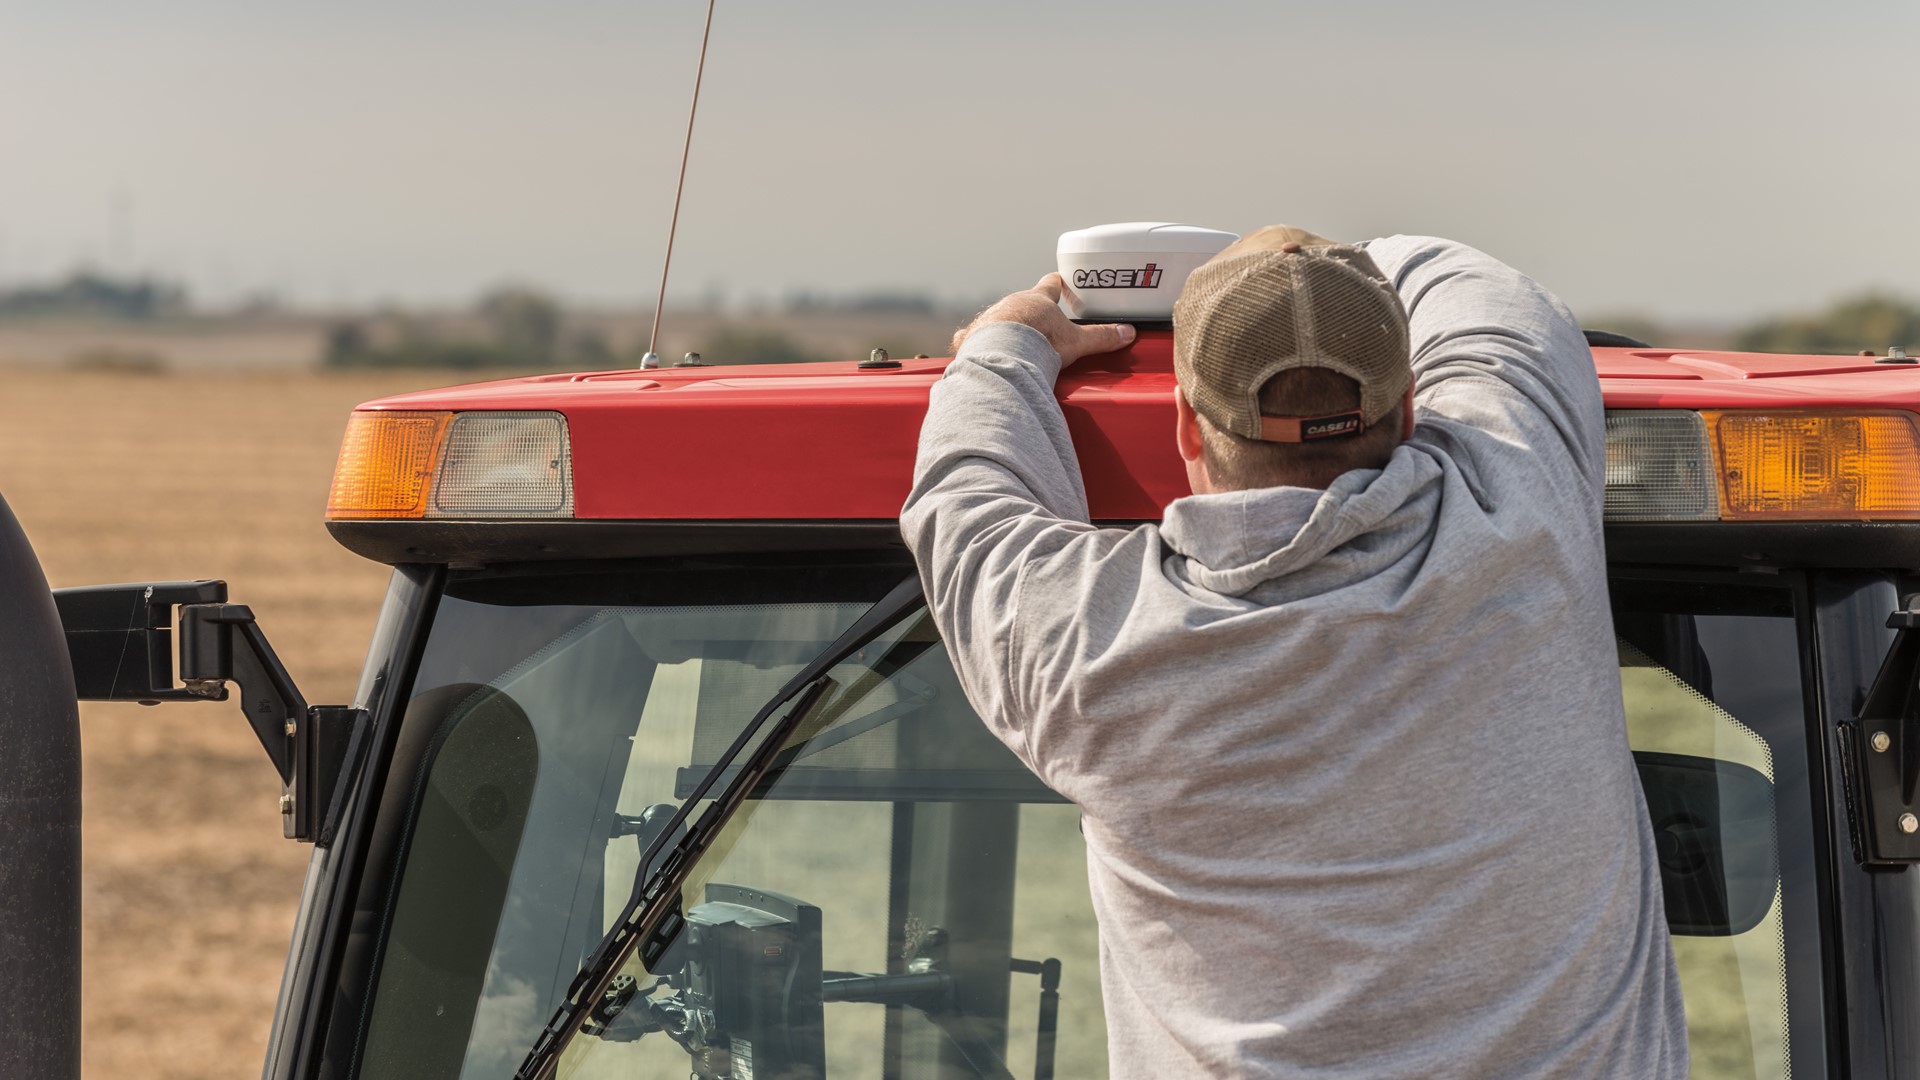 The new AccuStar GPS receiver can equip  late-model tractors or combines with guidance capabilities